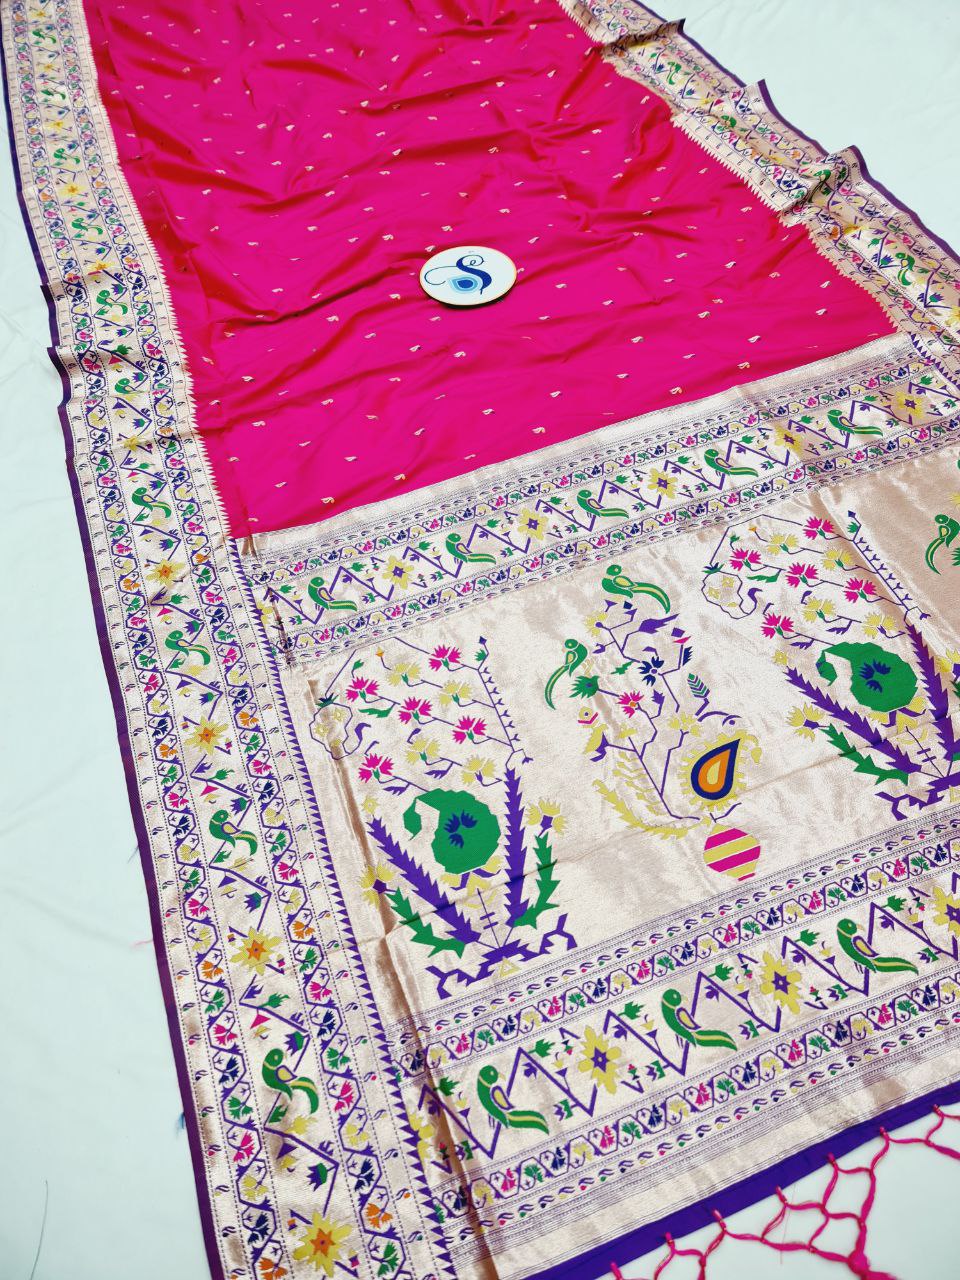 Elephant saree border | Paper embroidery, Fabric paint designs, Border  embroidery designs